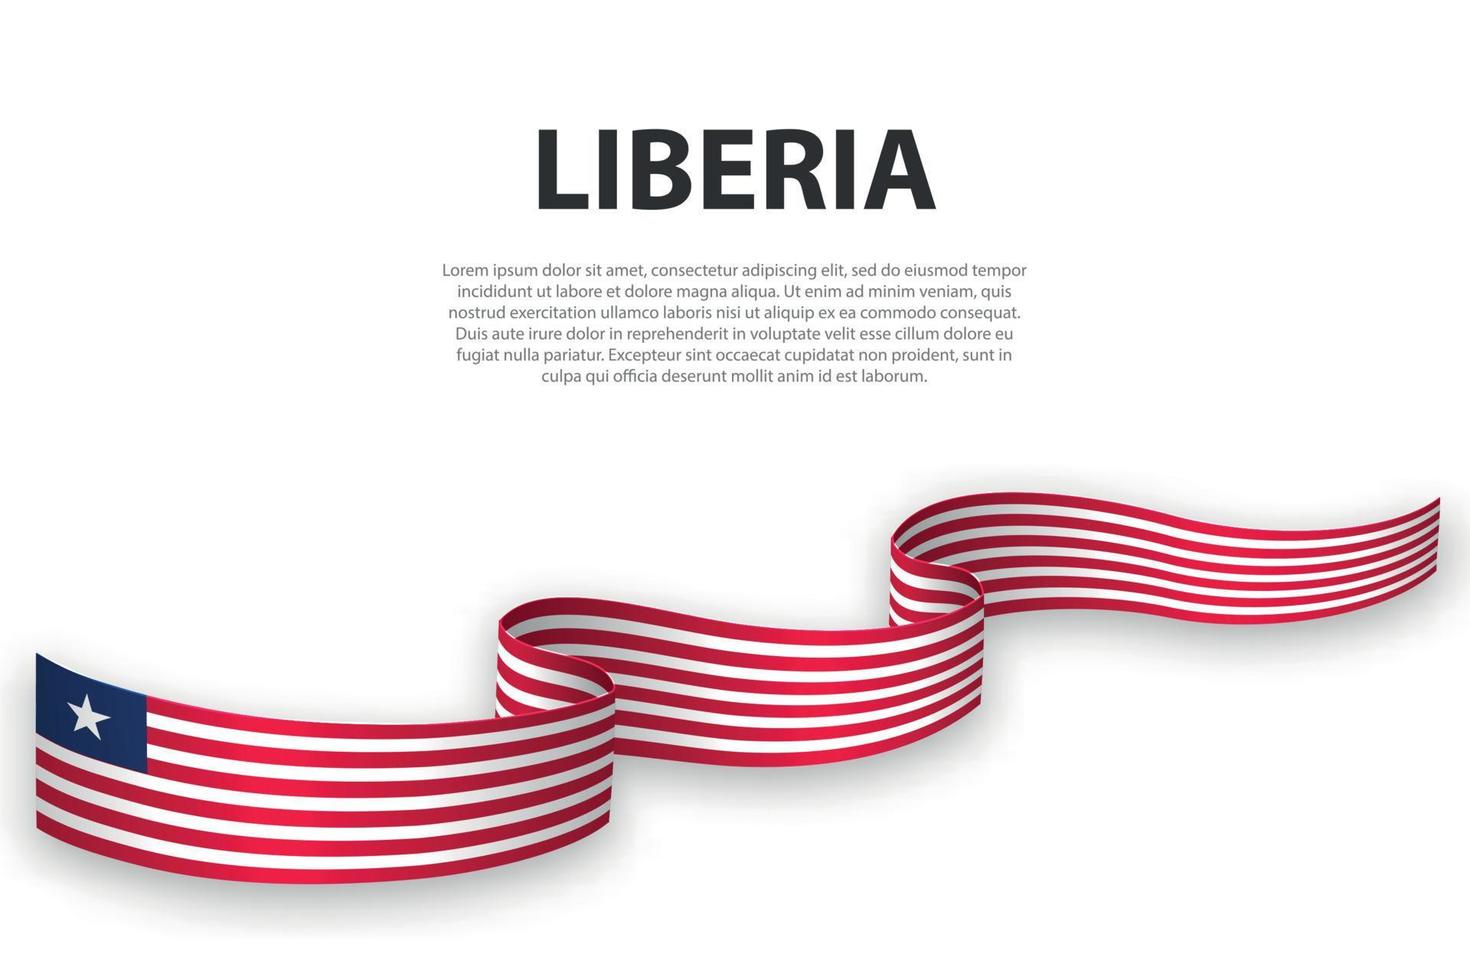 Waving ribbon or banner with flag of Liberia vector